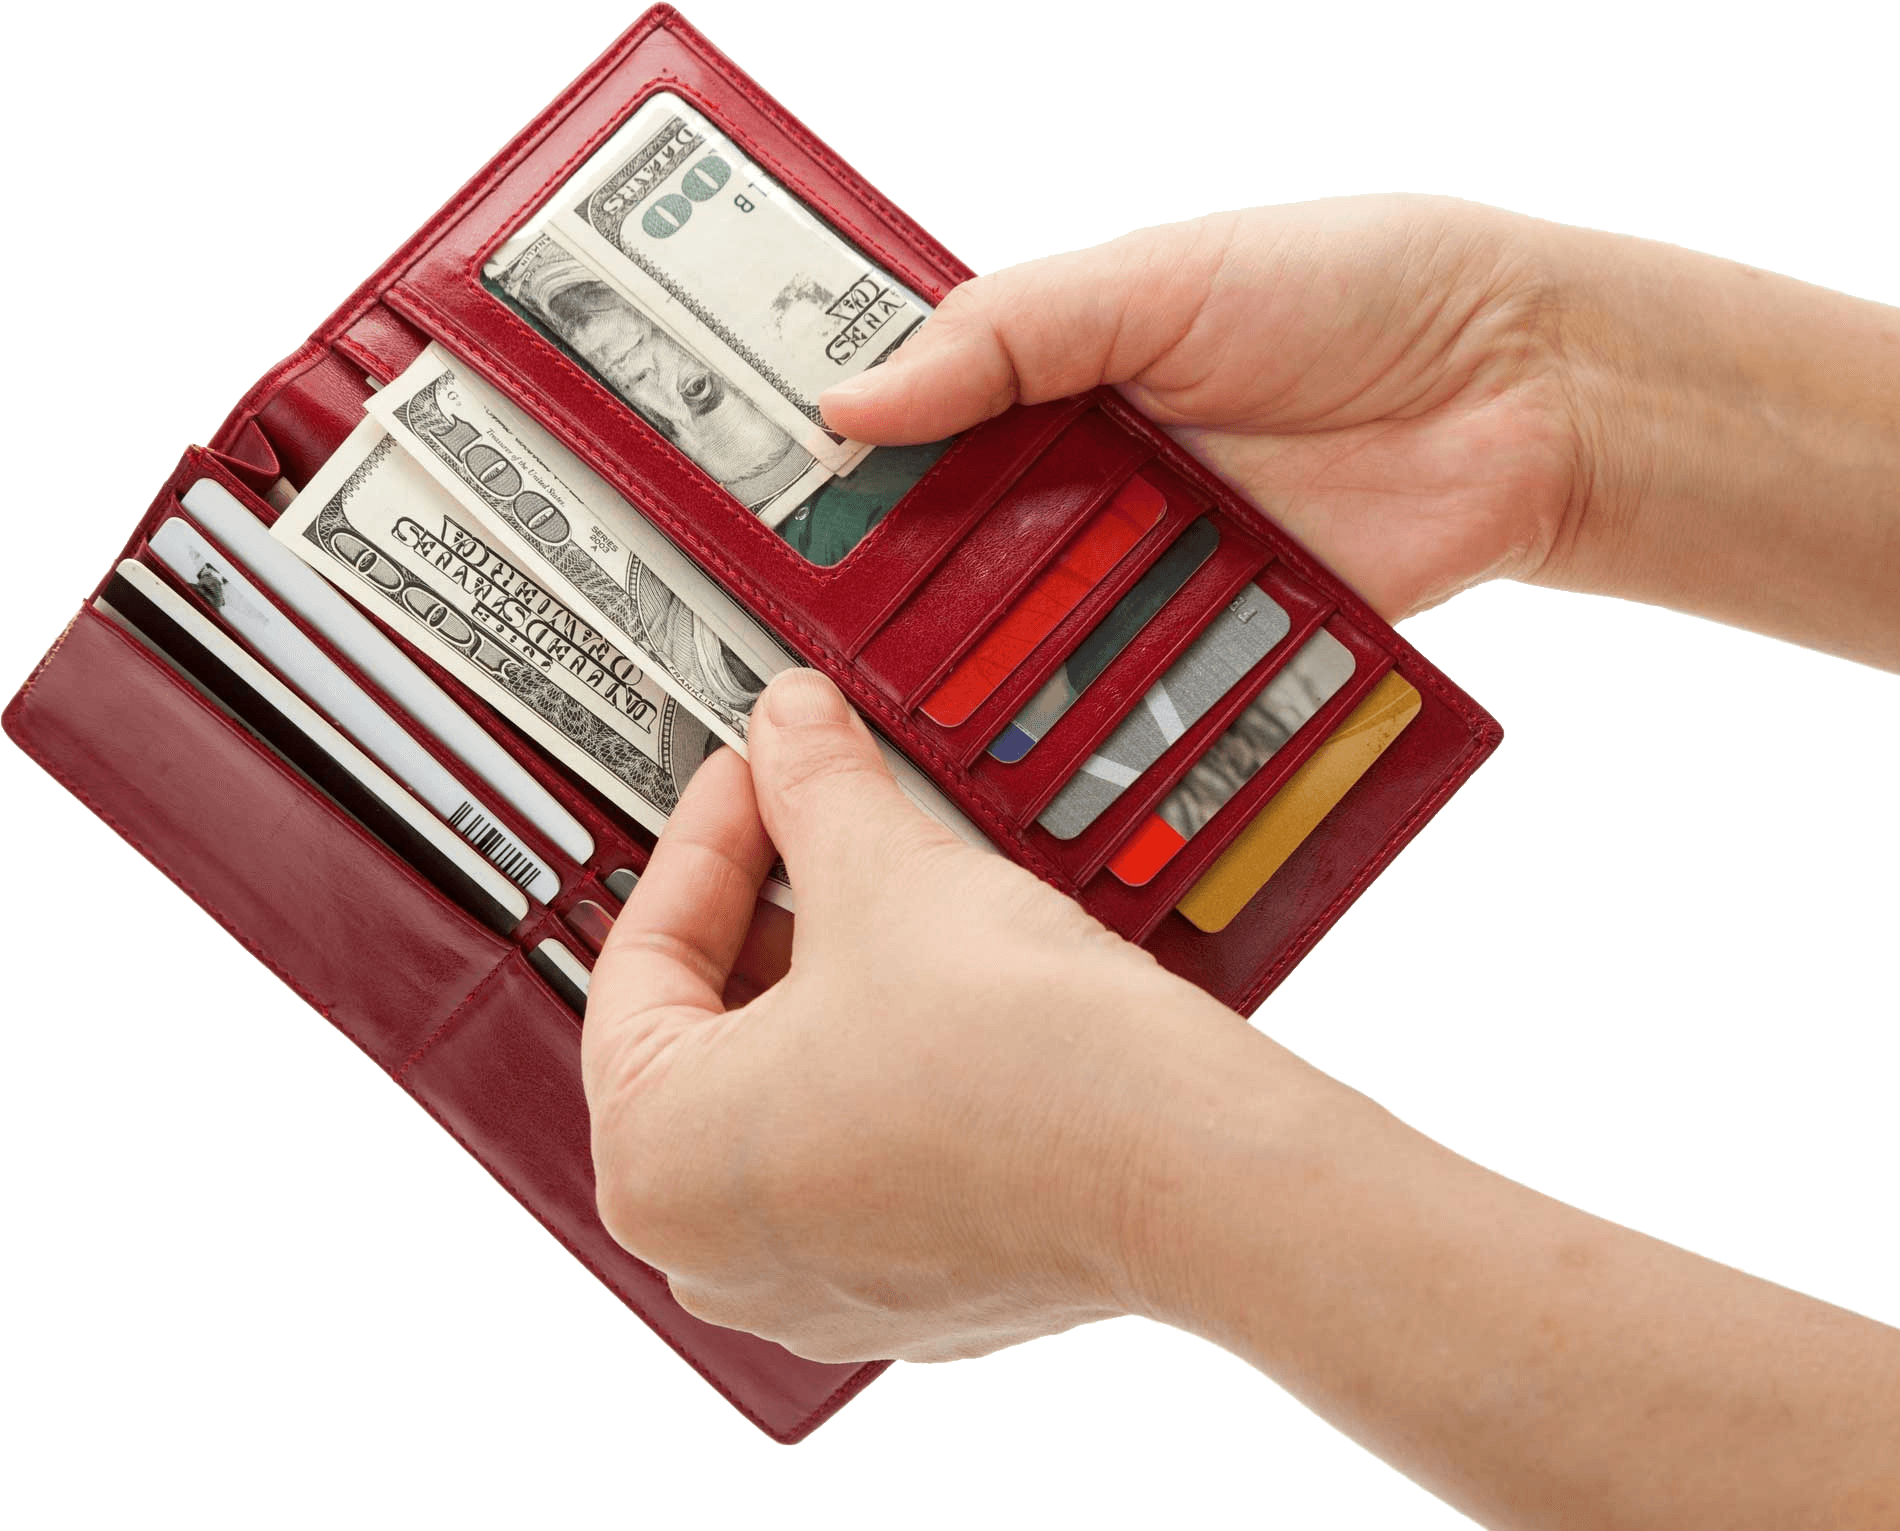 Wallet In Hands Png Image PNG Image